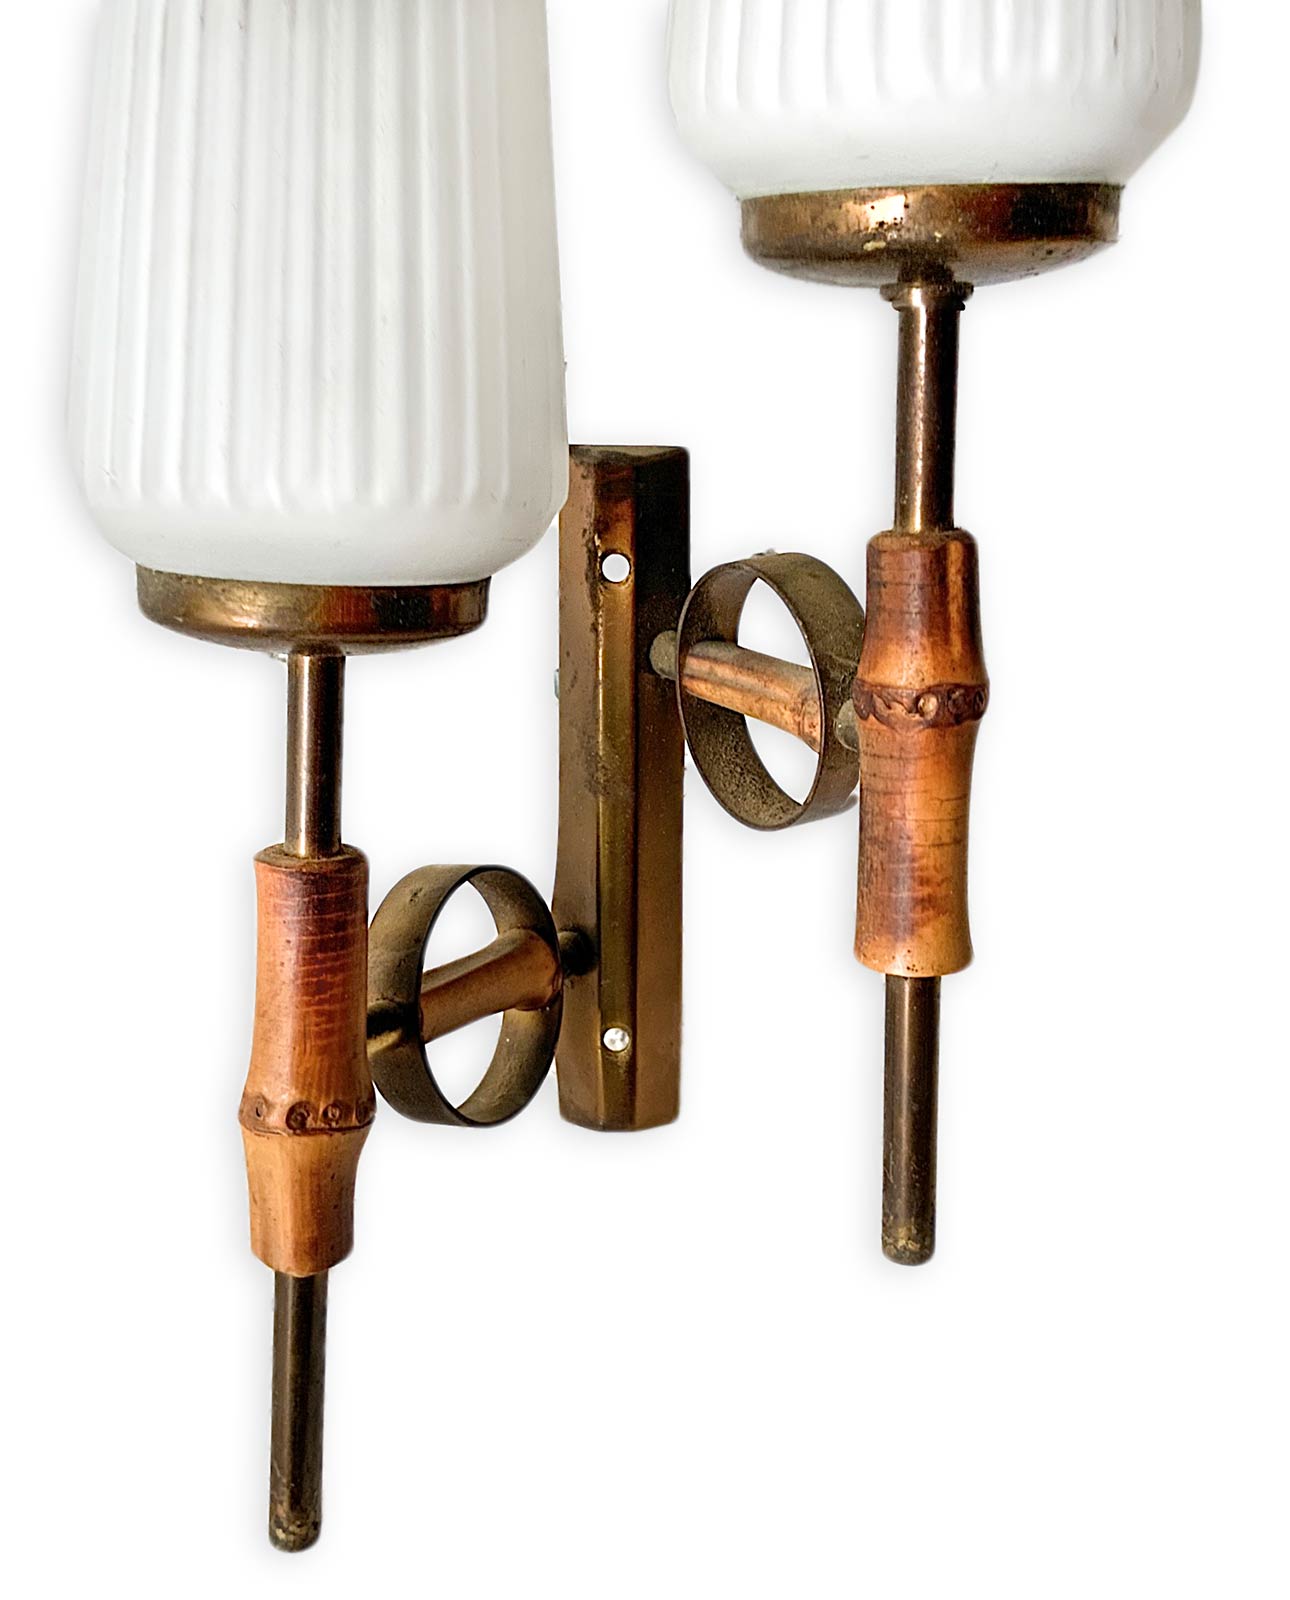 Applique, Italian production. Structure in brass, diffuser in white opal glass, bamboo detail, - Image 3 of 3